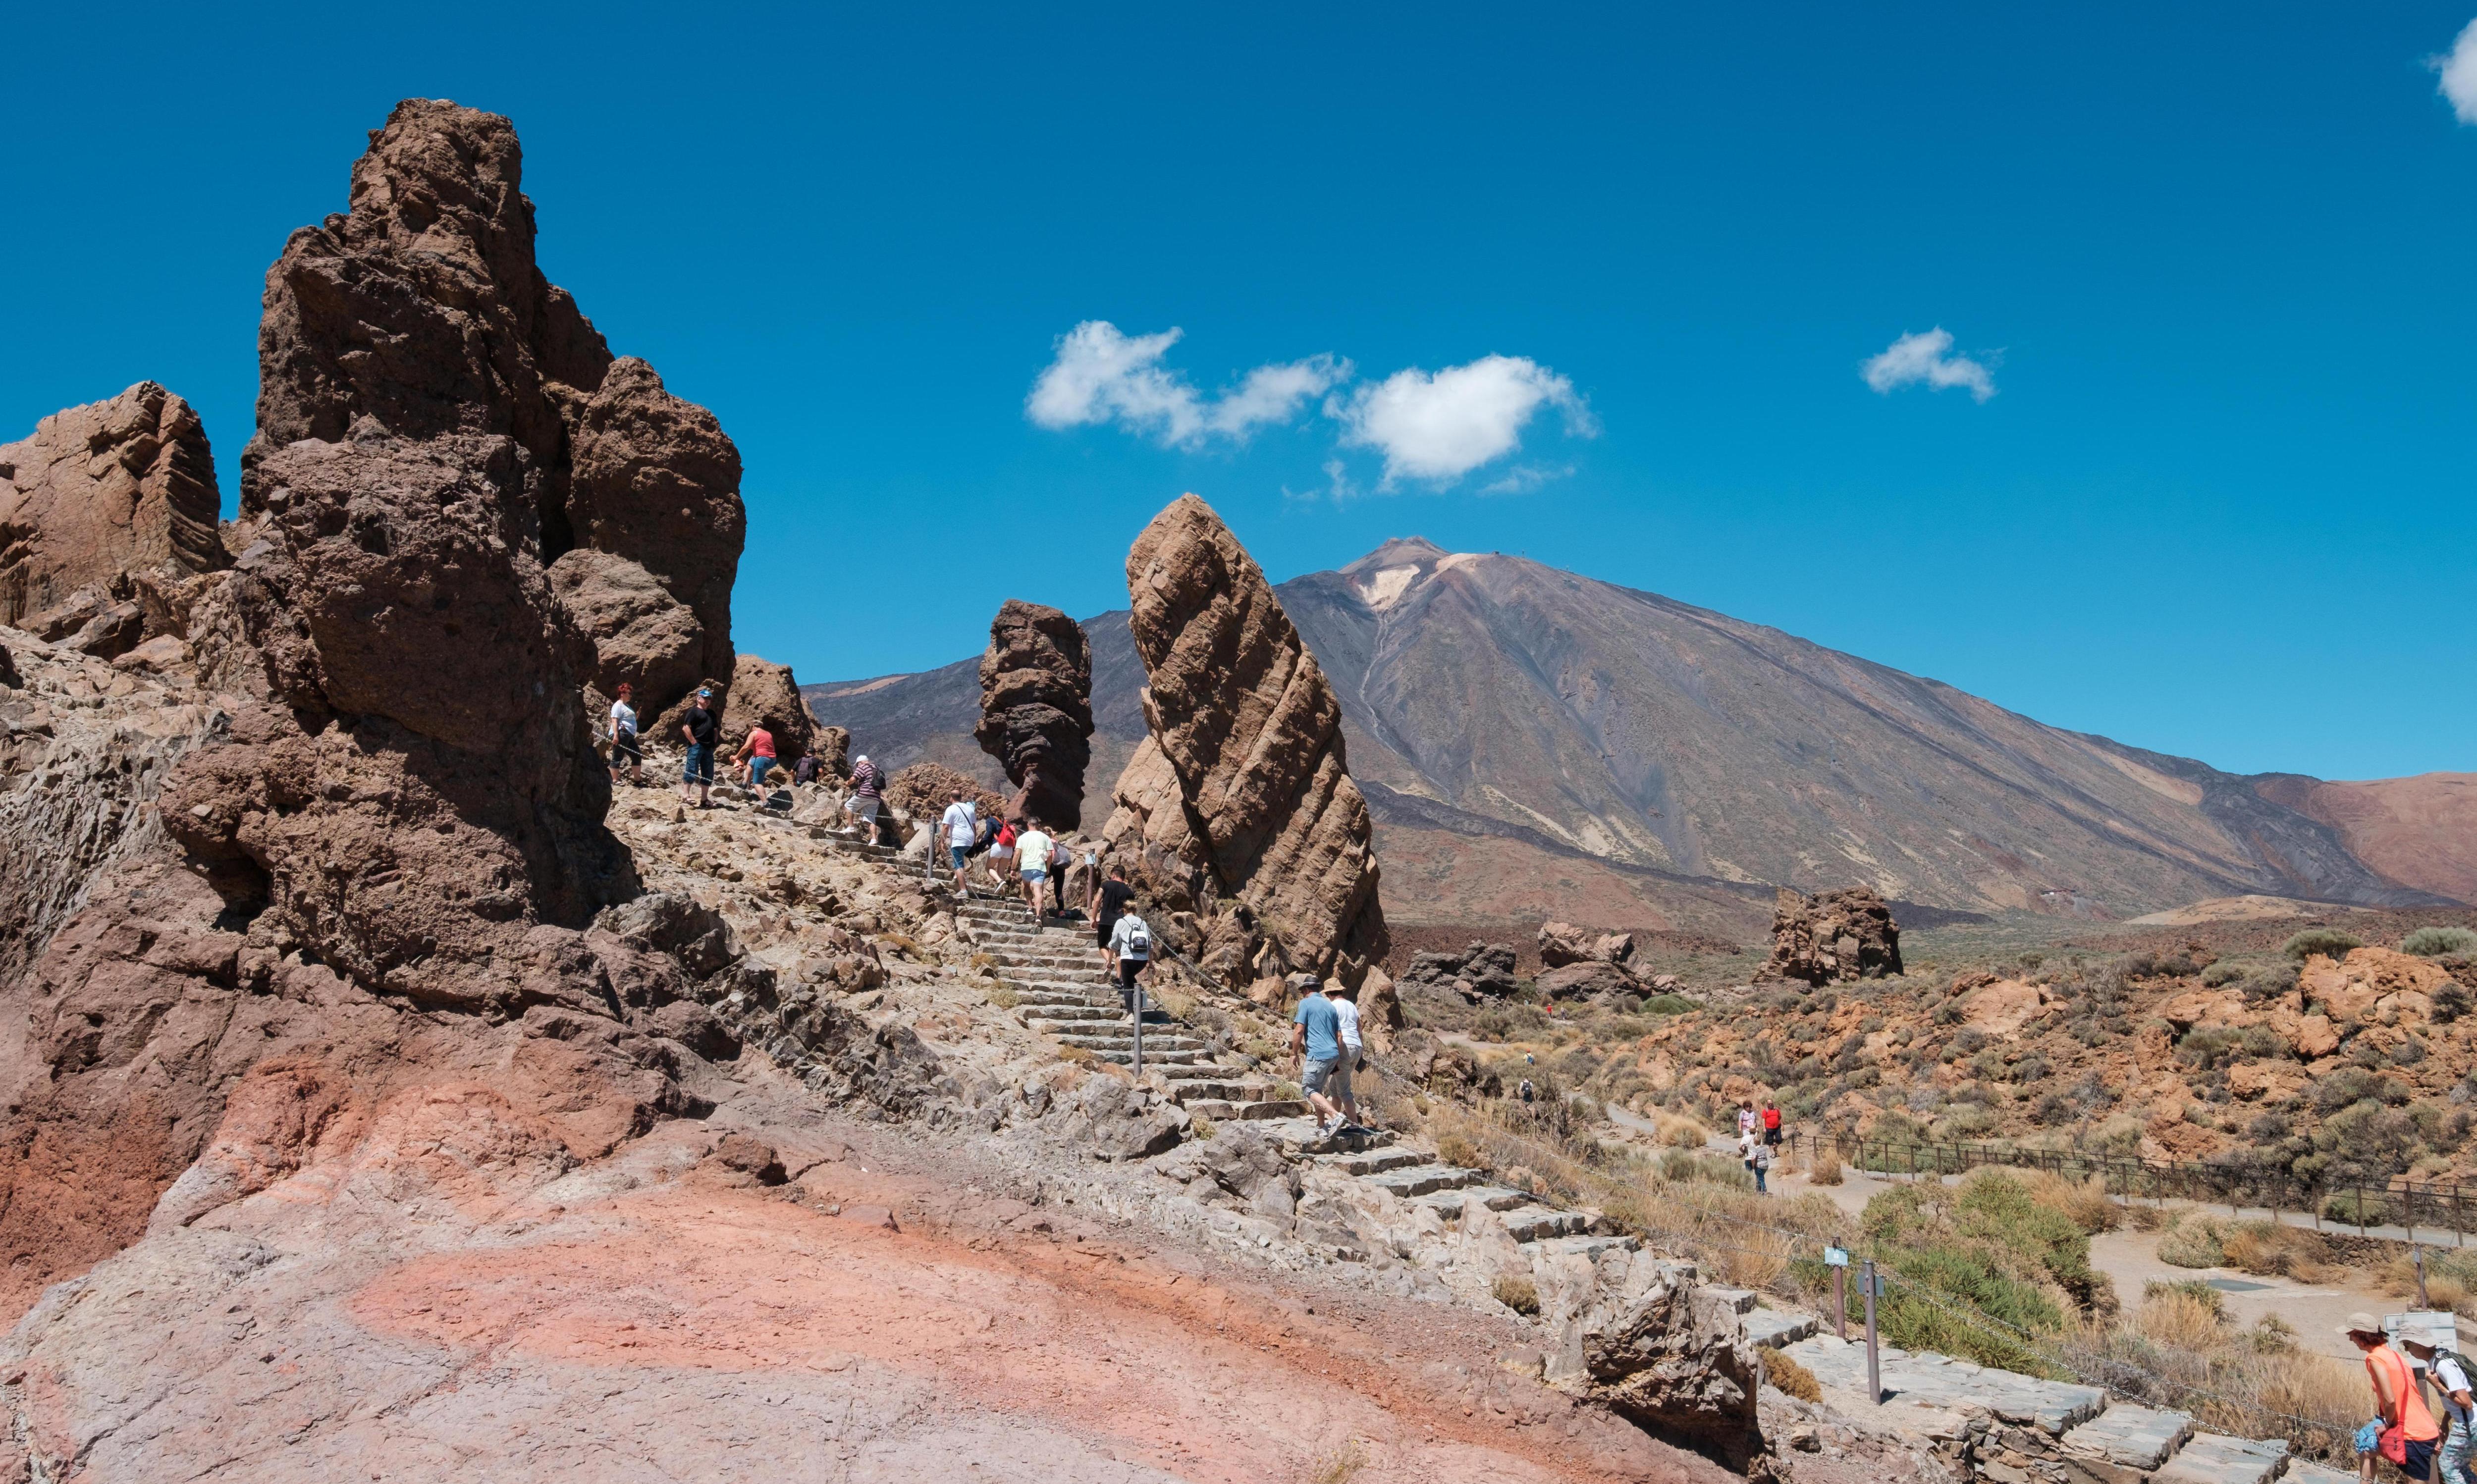 14 million people visited the Canary Islands last year